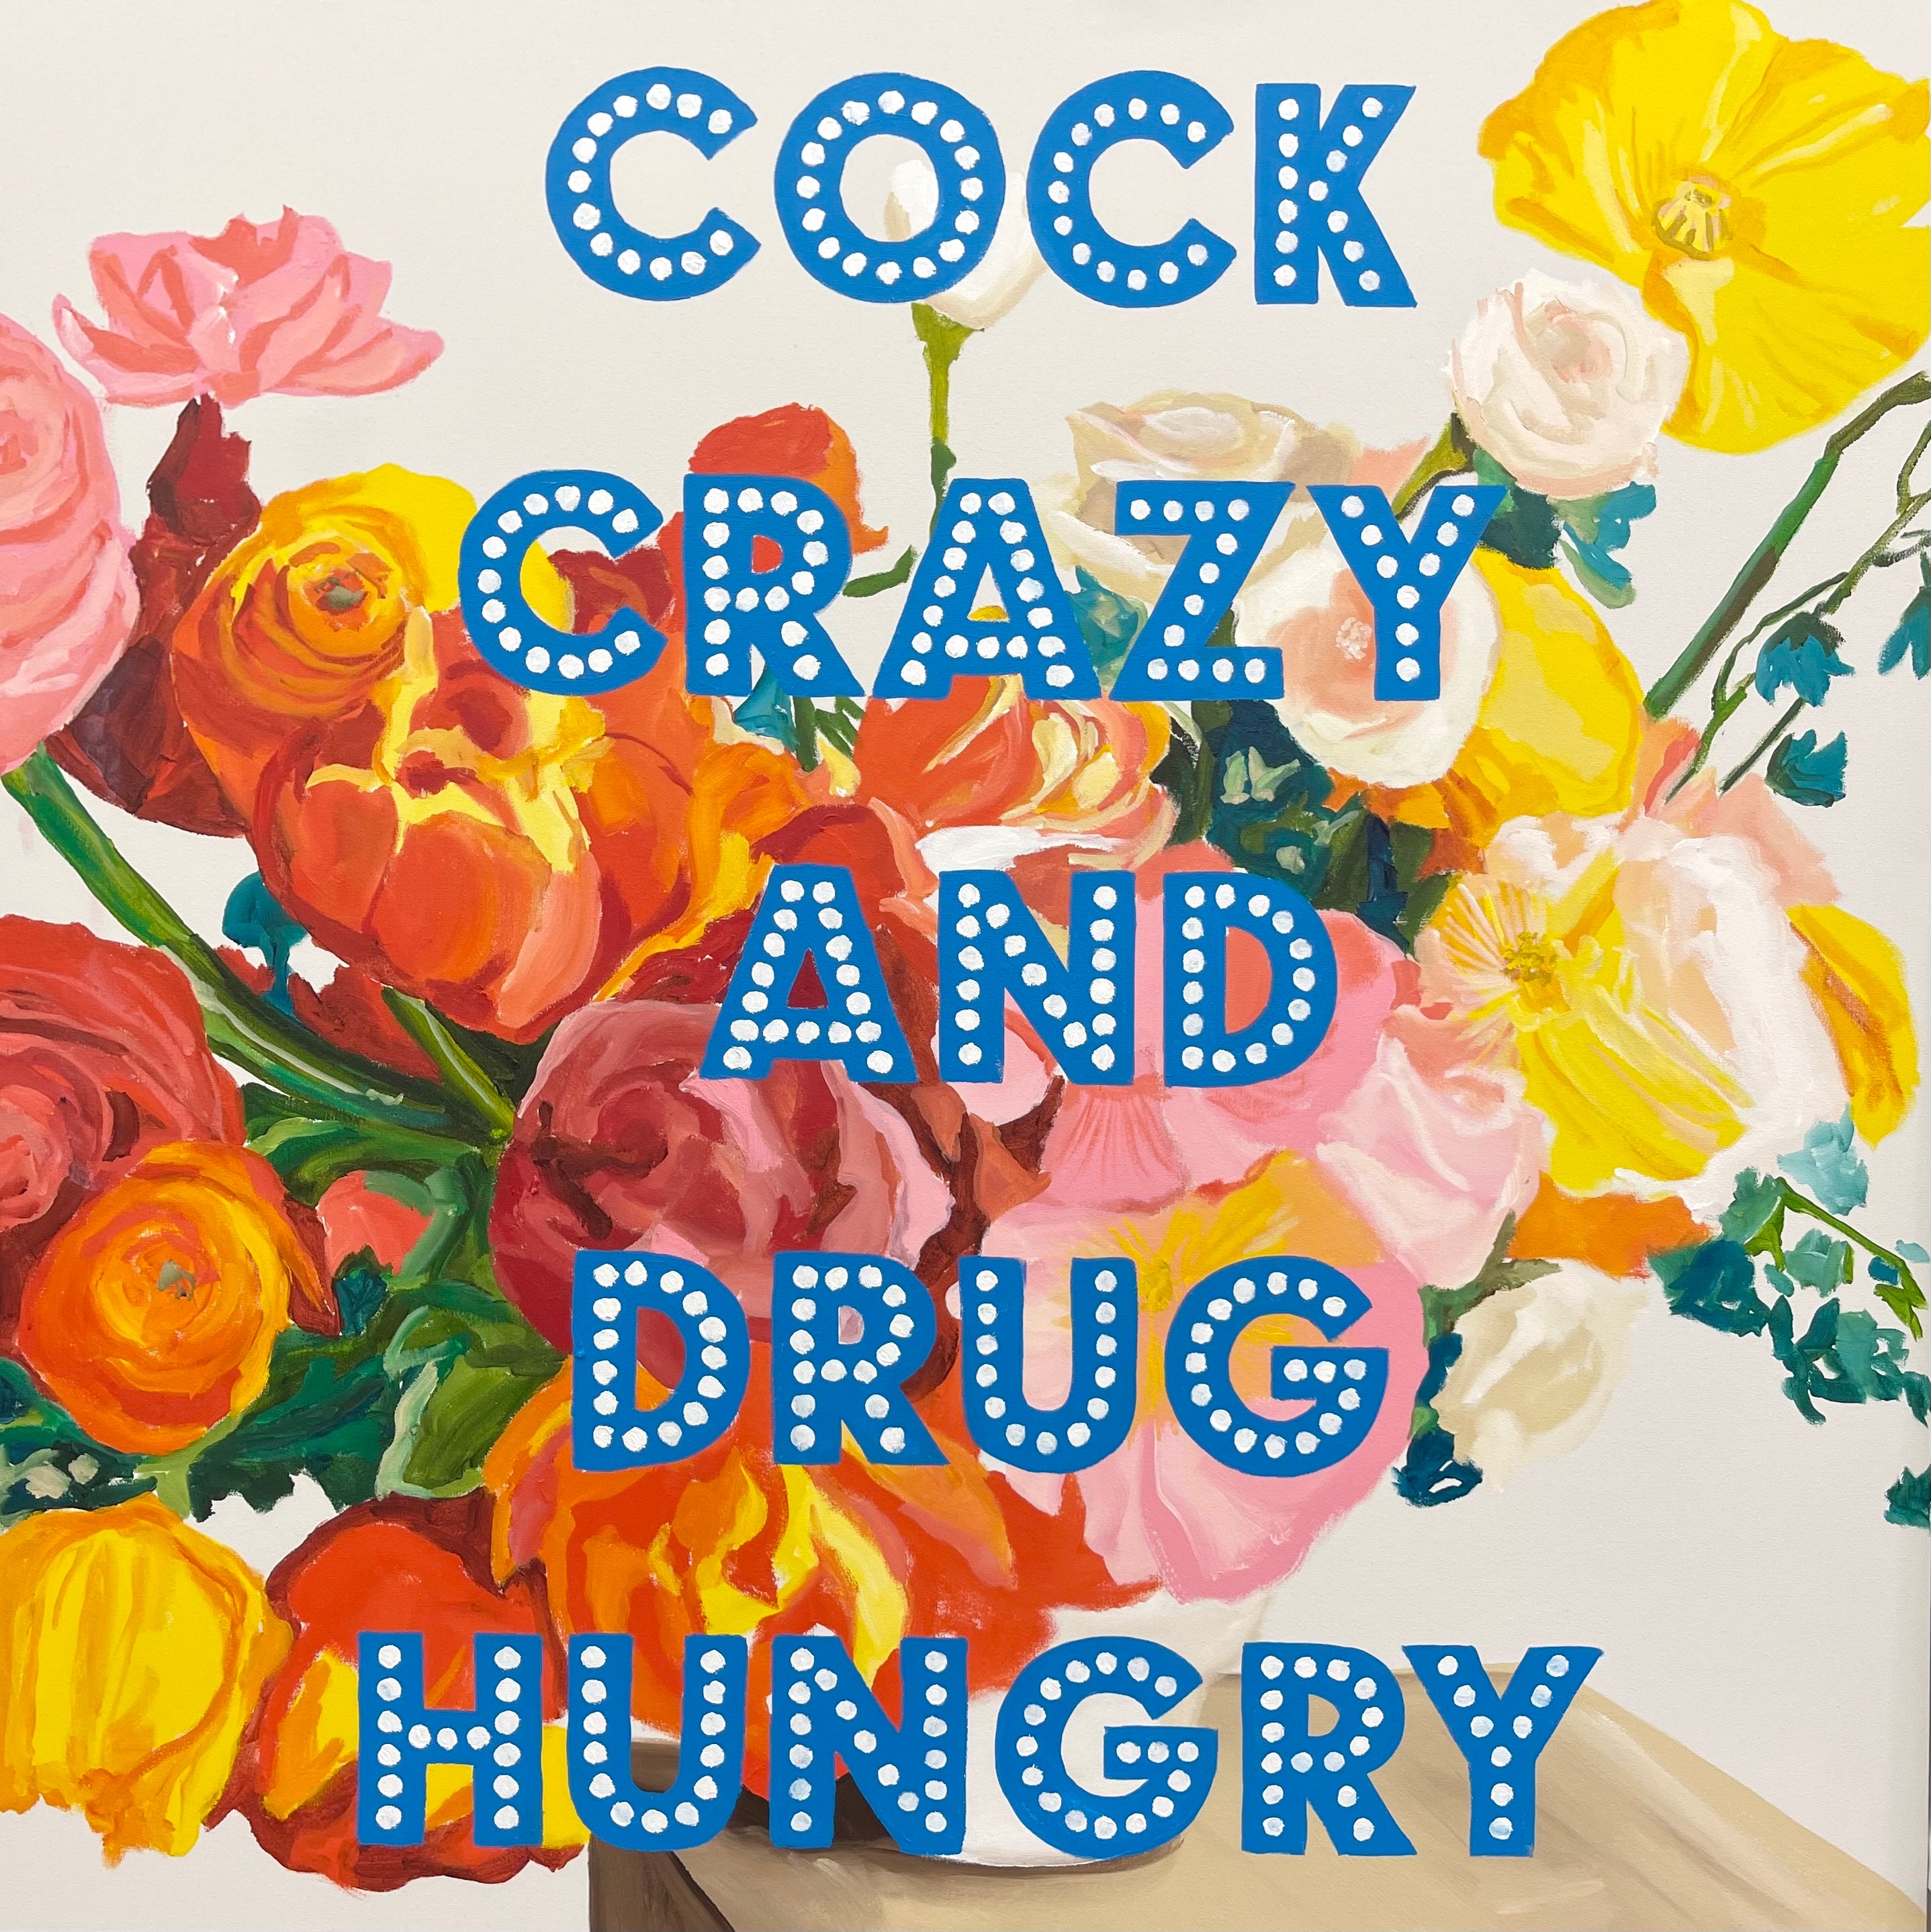 Cock Crazy and Drug Hungry